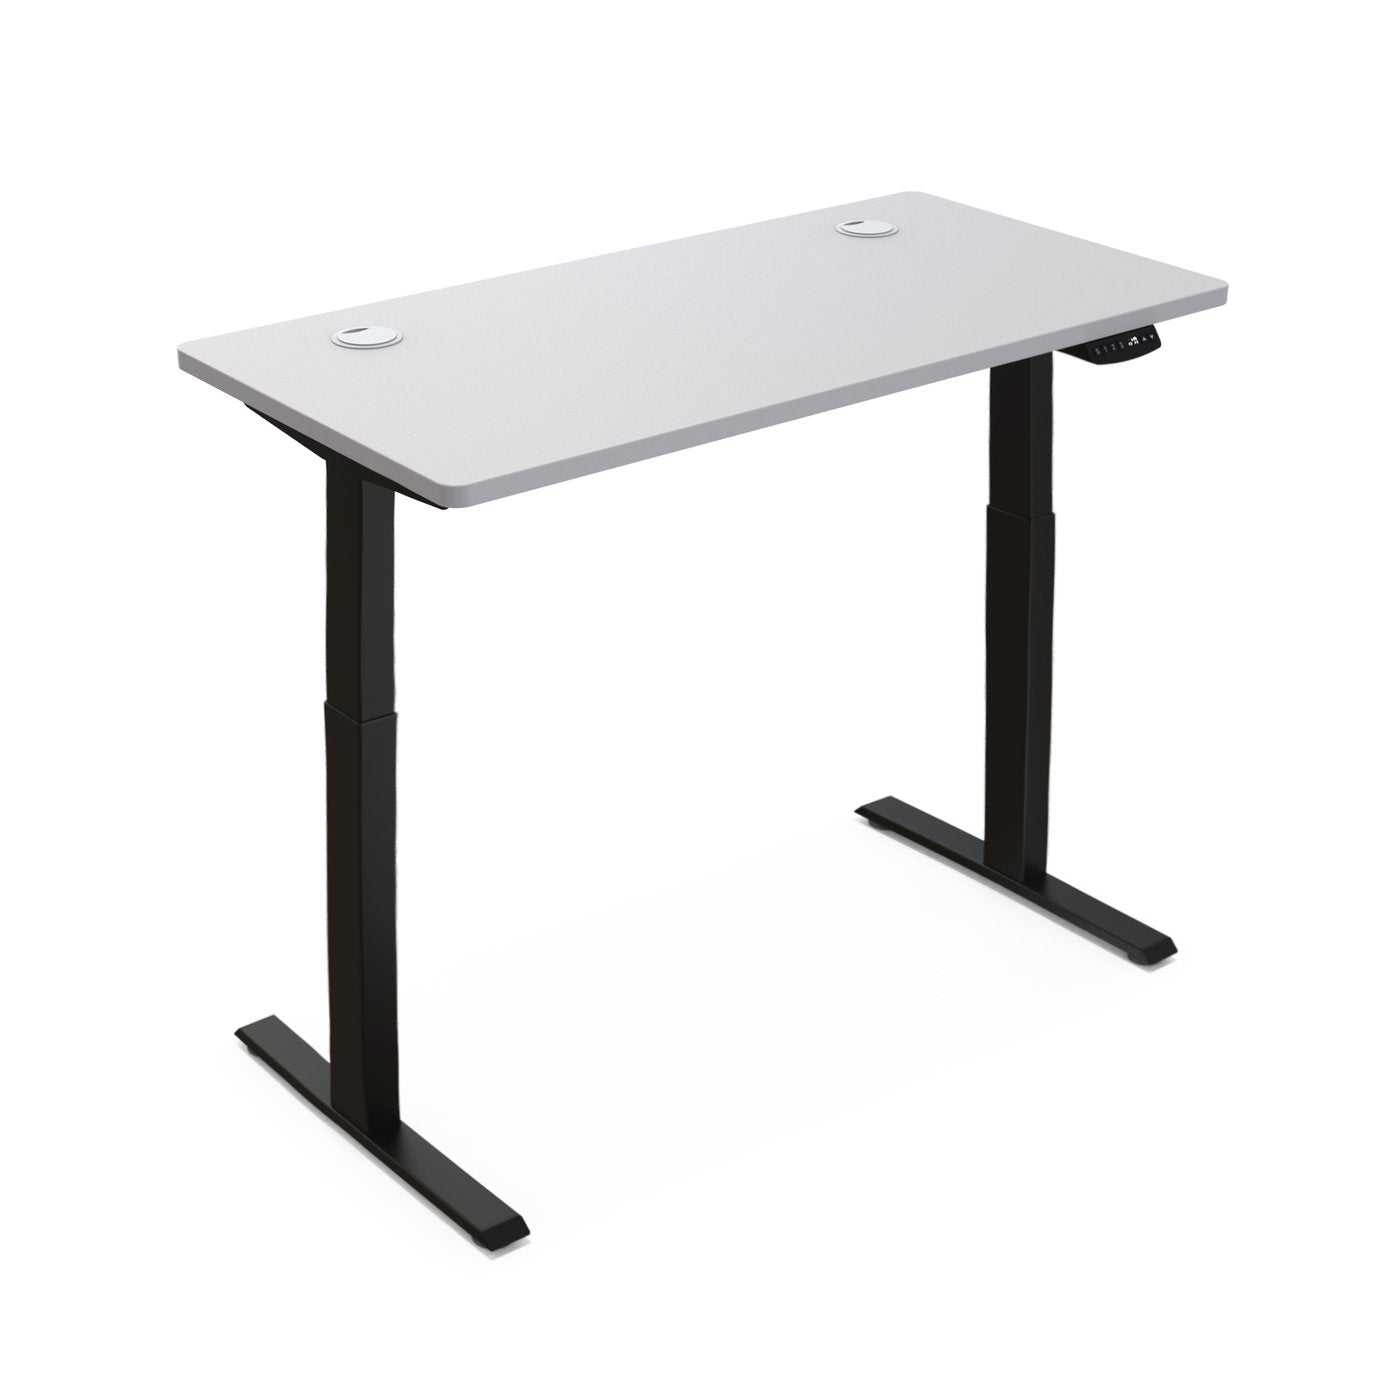 Bella Electric Height Adjustable Standing Desks with Rectangular Tabletop (55"x 31.5") for Home Office Workstation with 4 Color Option